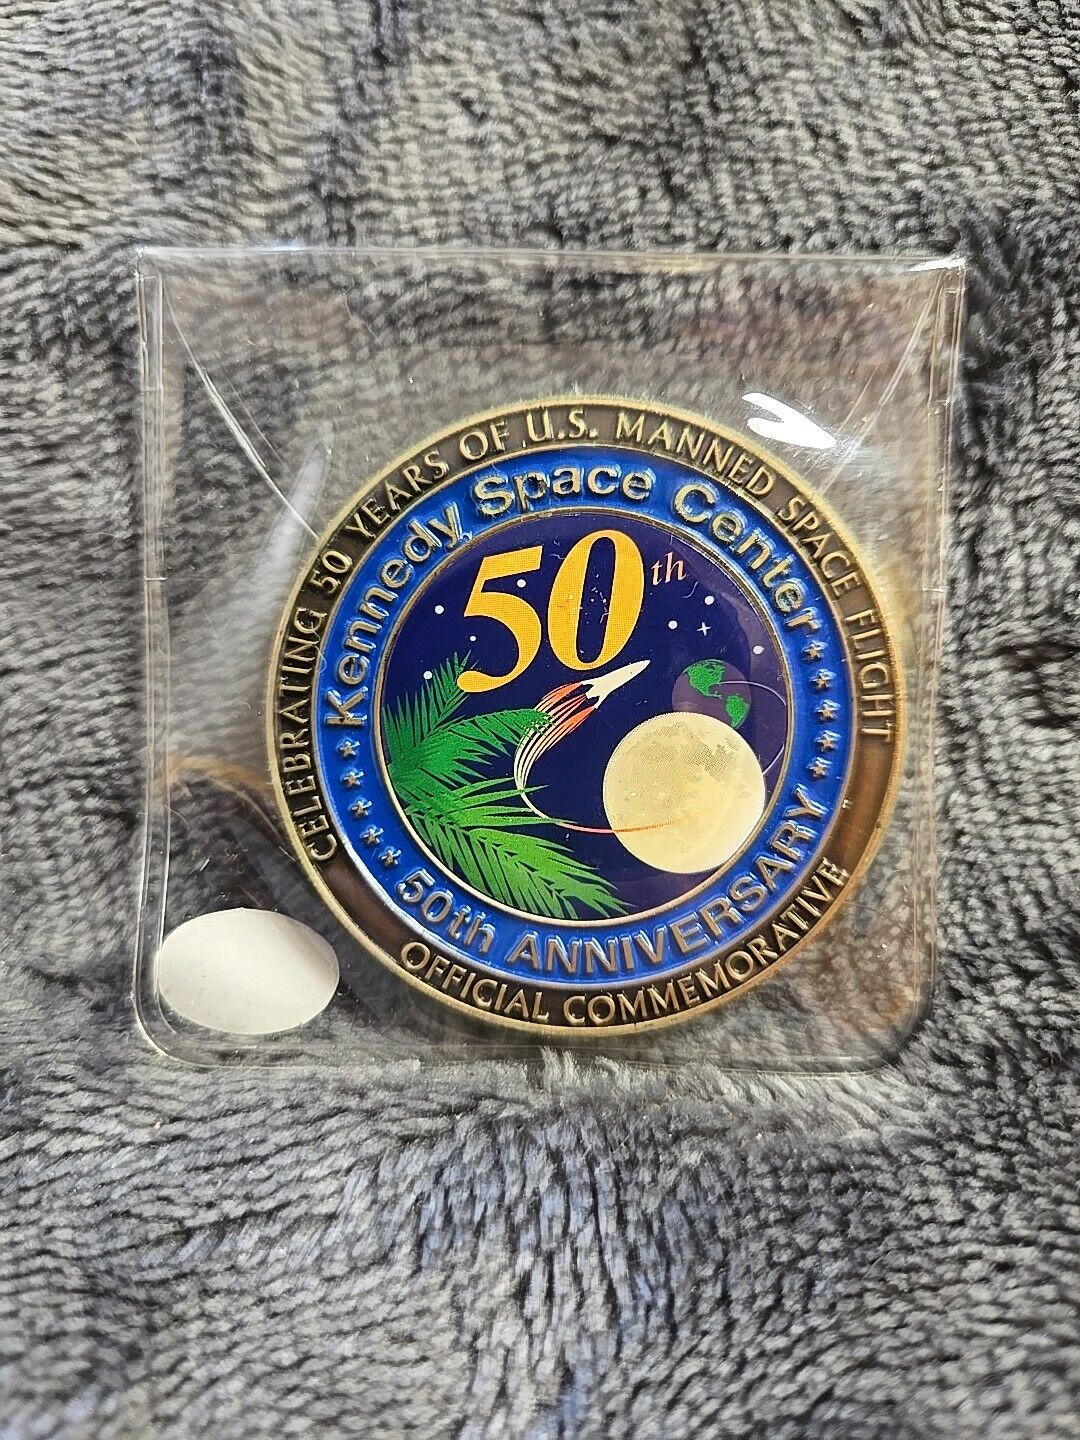 Kennedy Space Center 50th Anniversary Challenge Coin